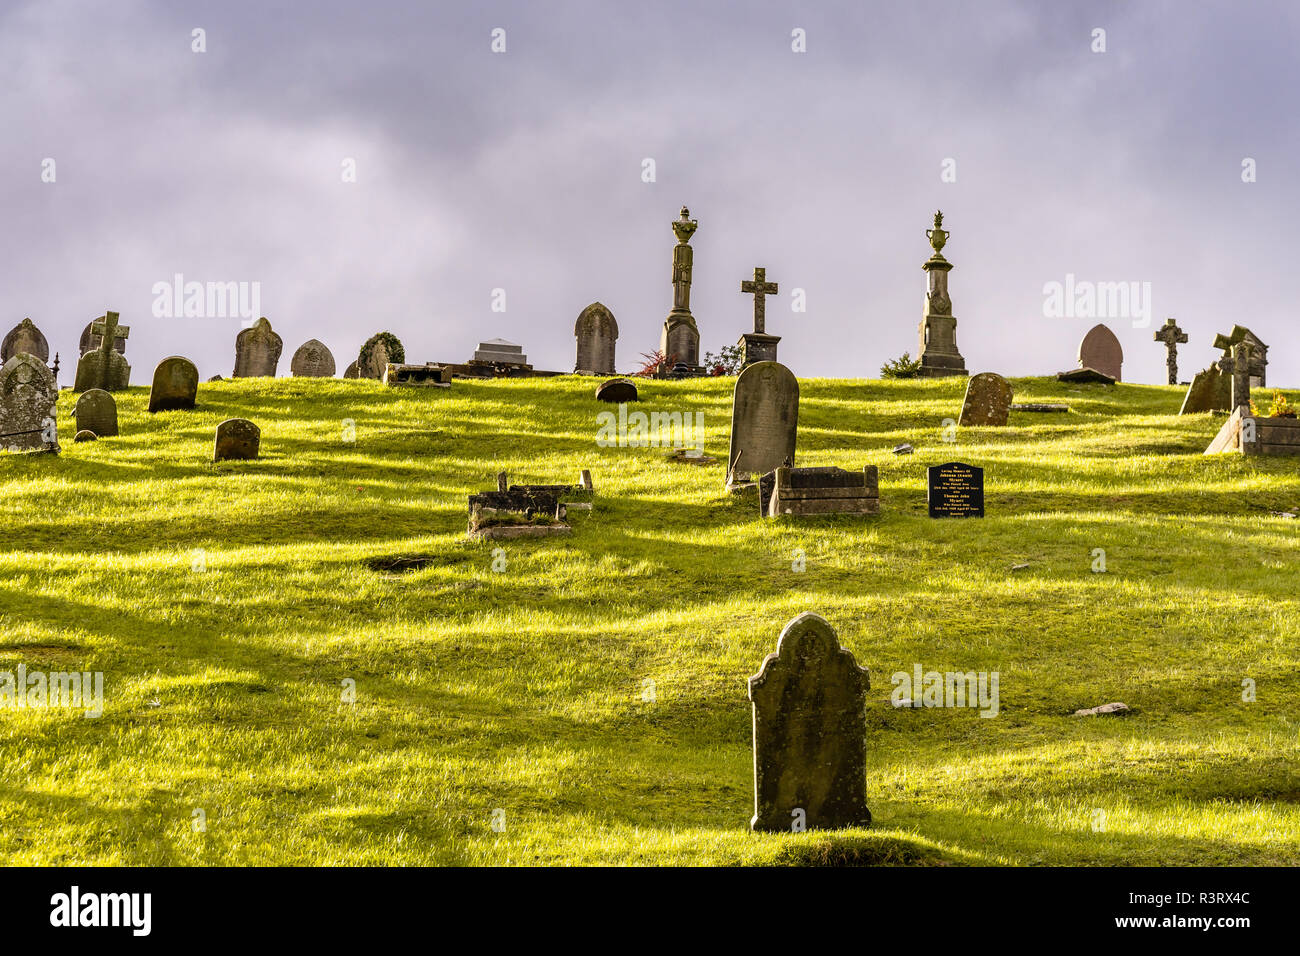 Sunlight and cloudy sky over old graves at Pant cemetery in Merthyr Tydfil, Wales, UK Stock Photo